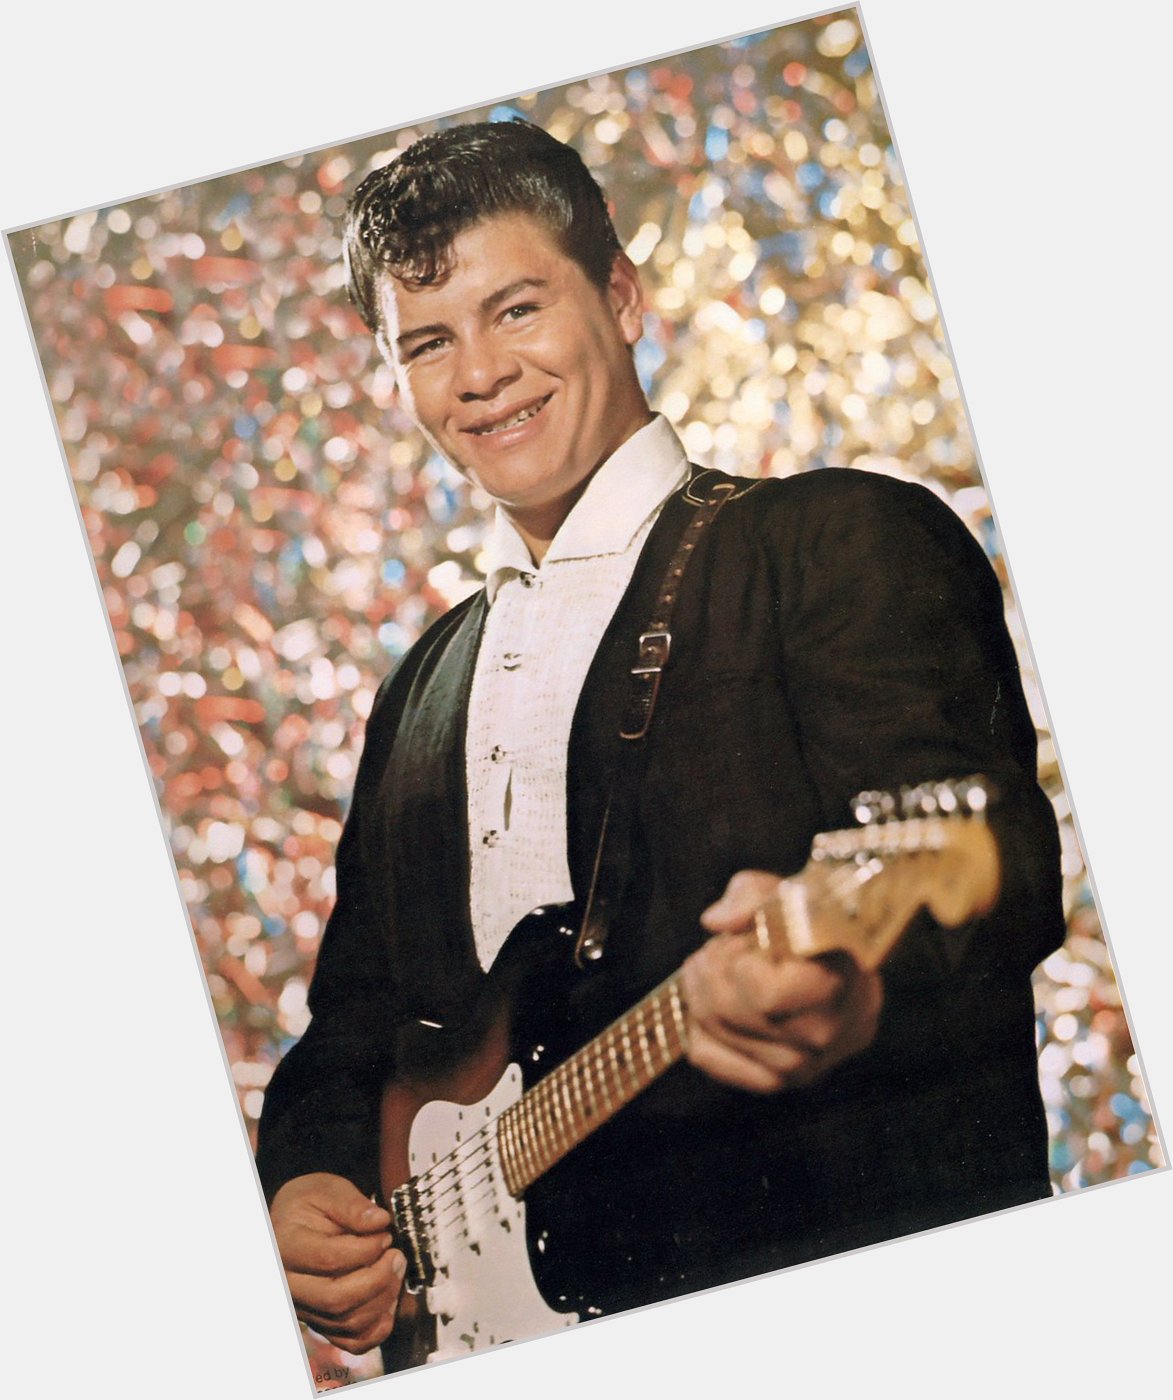 Happy Bday to the Prince of - Ritchie Valens! He would have been 79 today   